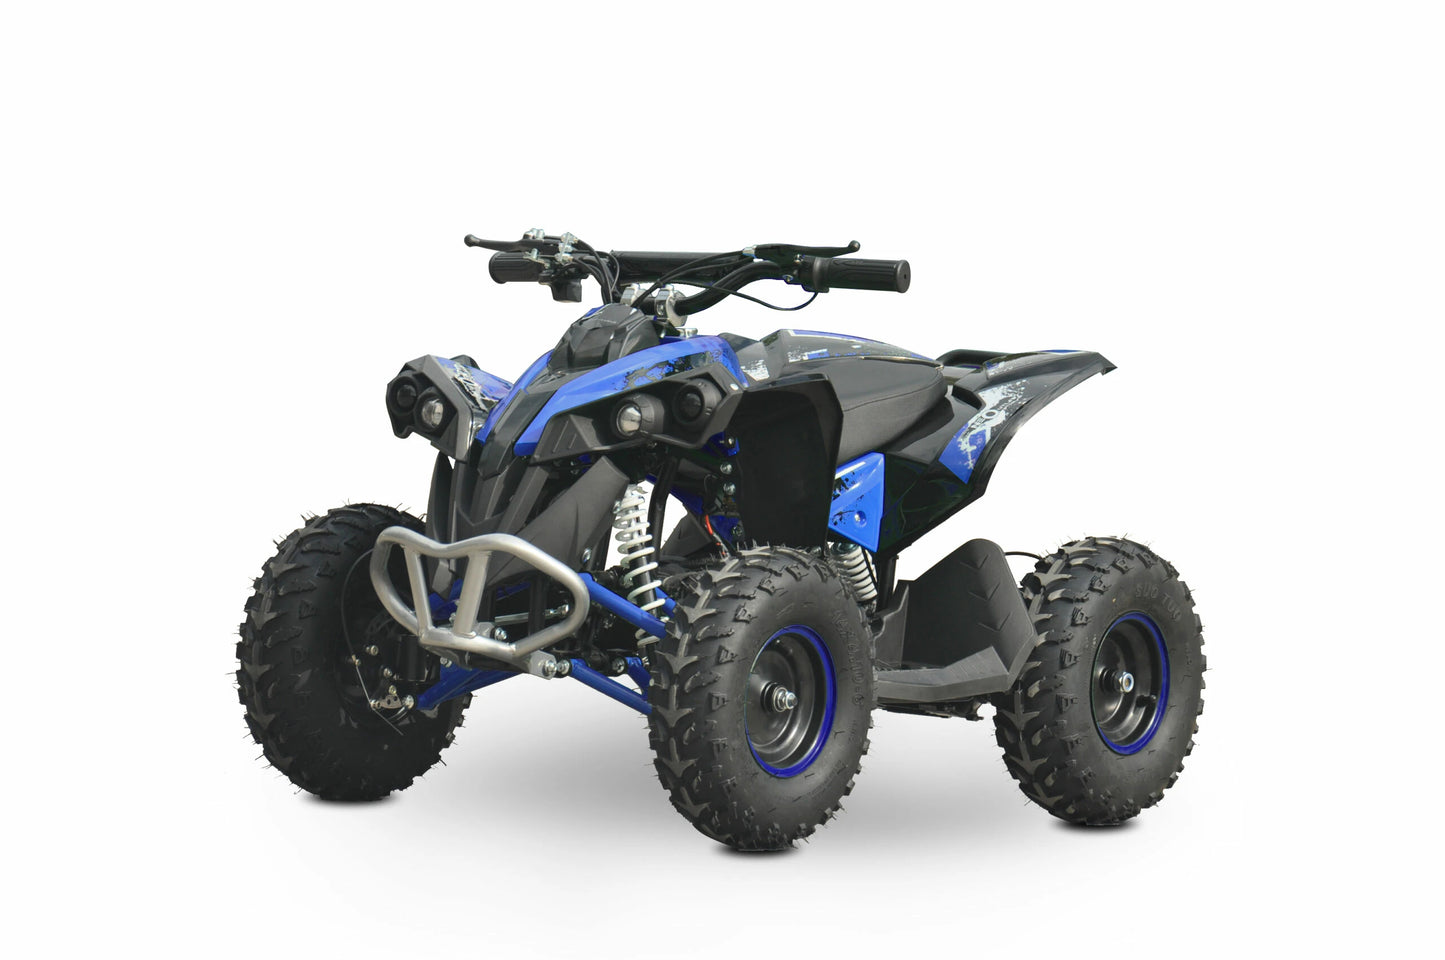 Neo Outlaw 1060W 36v Electric Brushless Shaft Driven Quad Bike In Blue